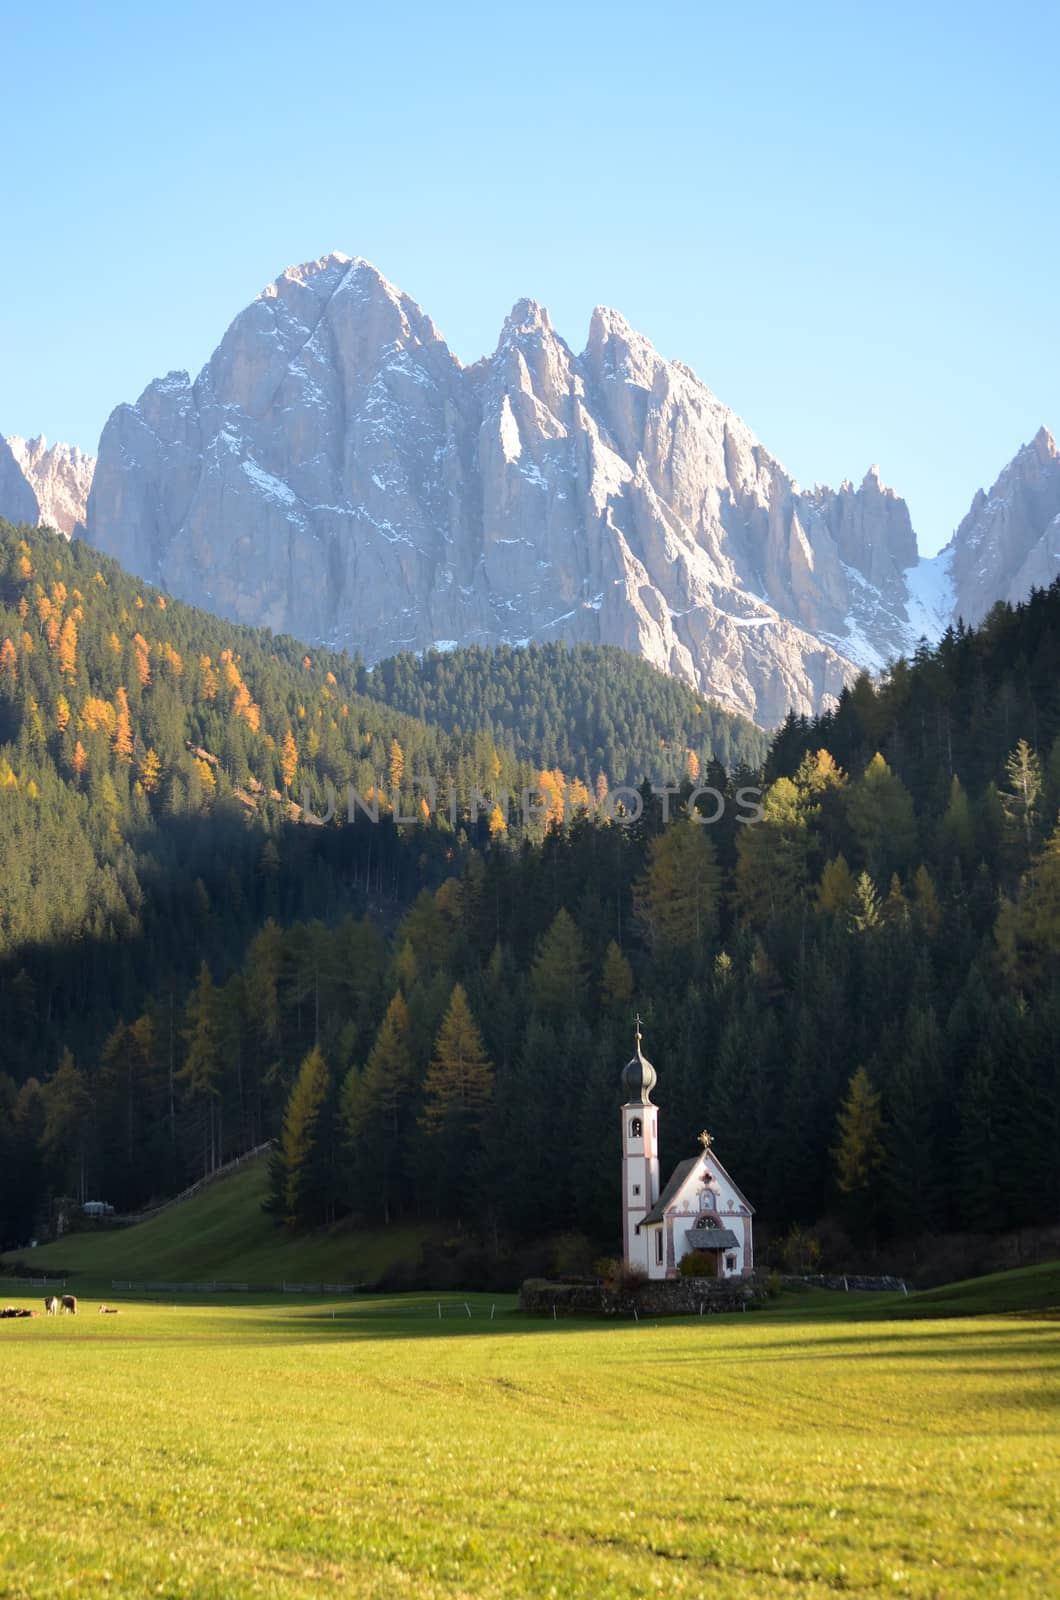 The famous church of San Giovanni in Ranui (Sankt Johann) in front of the Geisler or Odle dolomites mountain peaks in Santa Maddalena (Sankt Magdalena) in the Val di Funes in Italy.